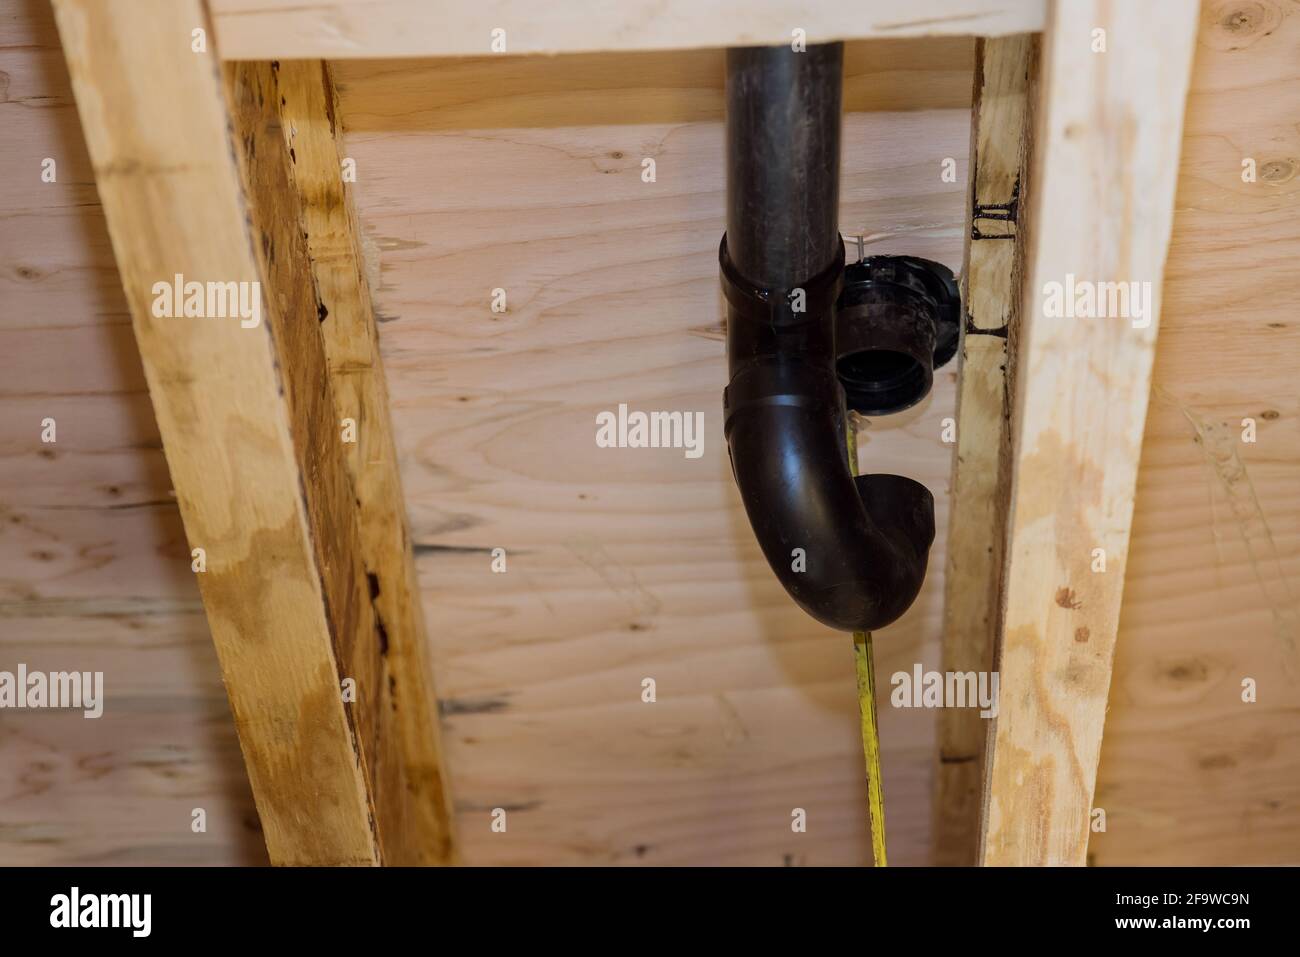 PVC plastic toilet sewer drain pipe in the plumber gluing, on wooden frame beam of house Stock Photo